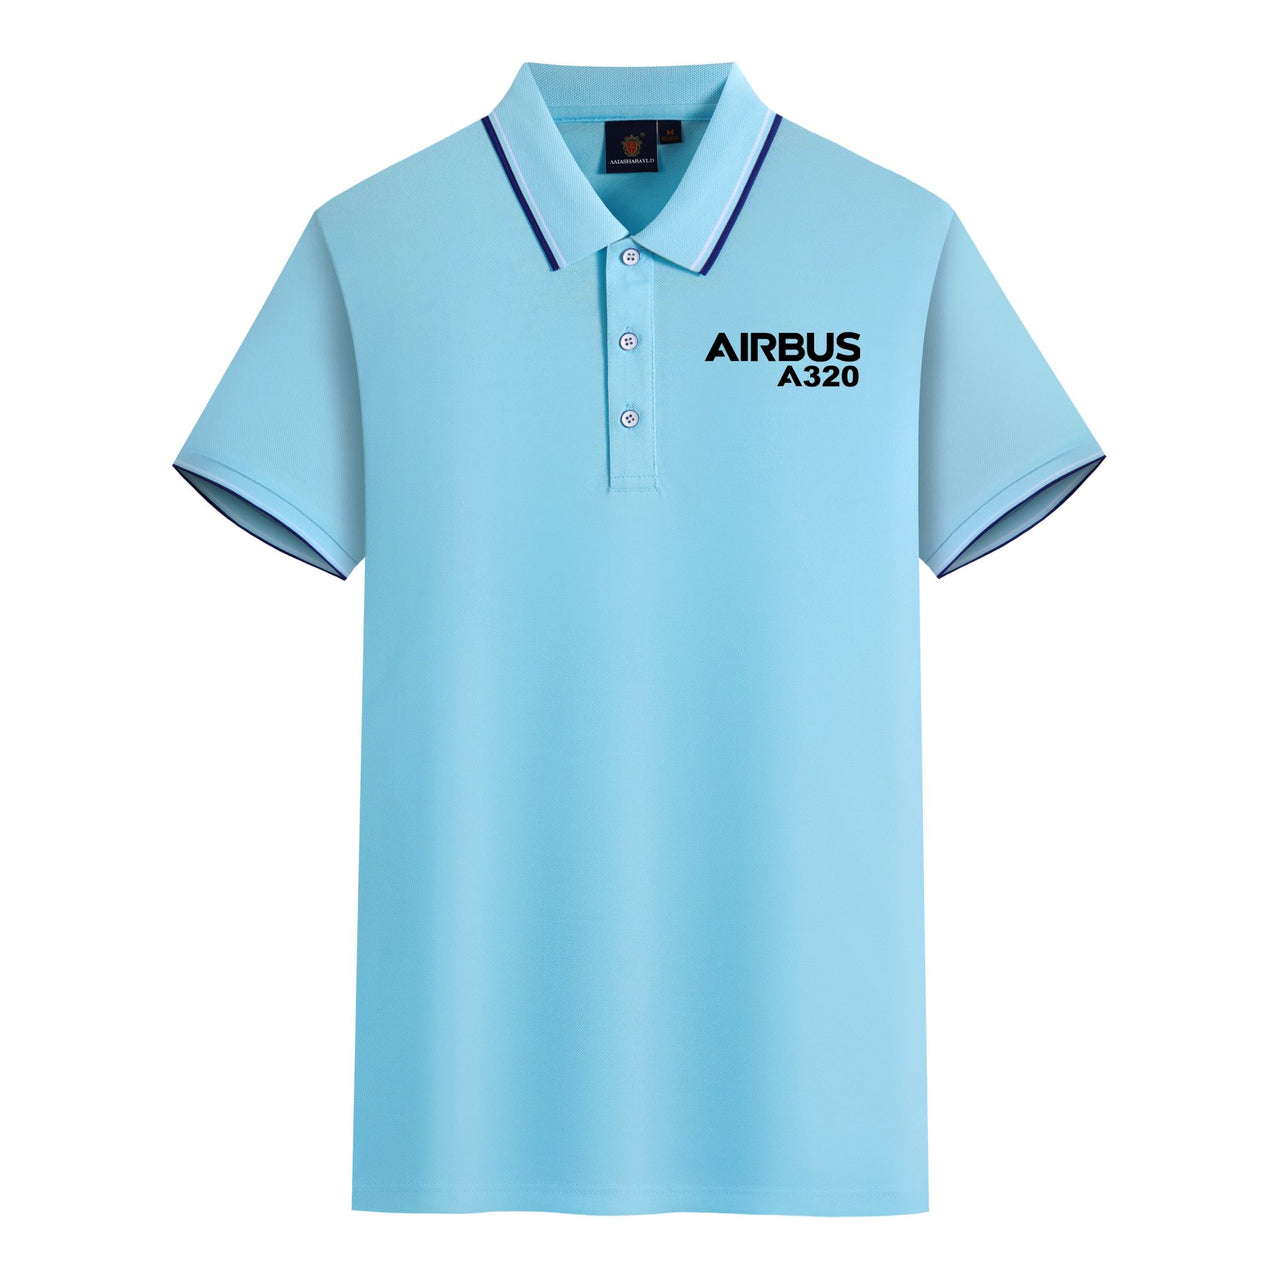 Airbus A320 & Text Designed Stylish Polo T-Shirts